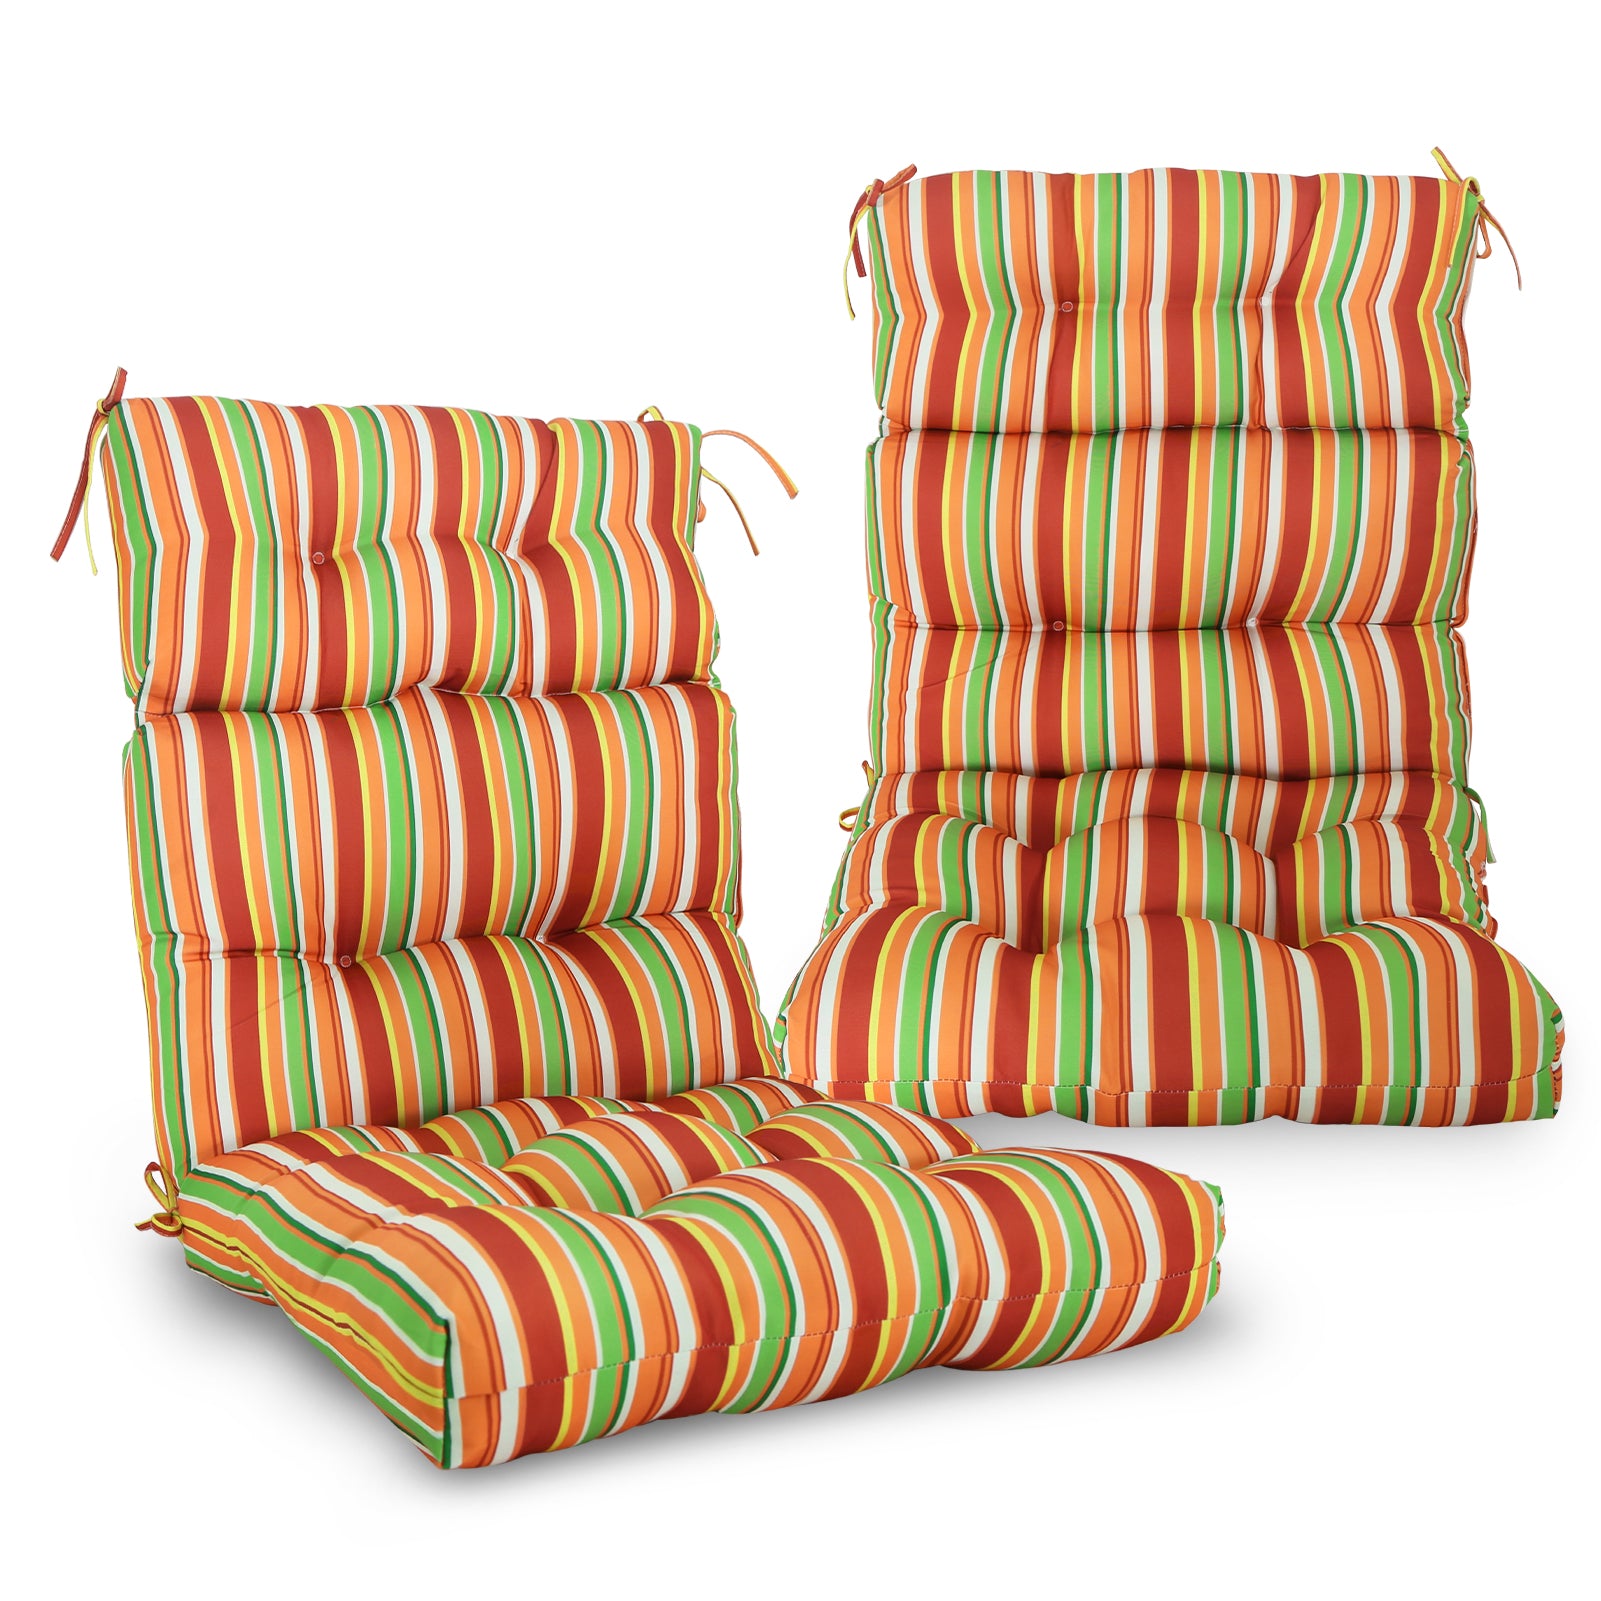 Eagle Peak Tufted Outdoor/Indoor Seat/Back Chair Cushion, Set of 2, 42 x 21 in, Beige